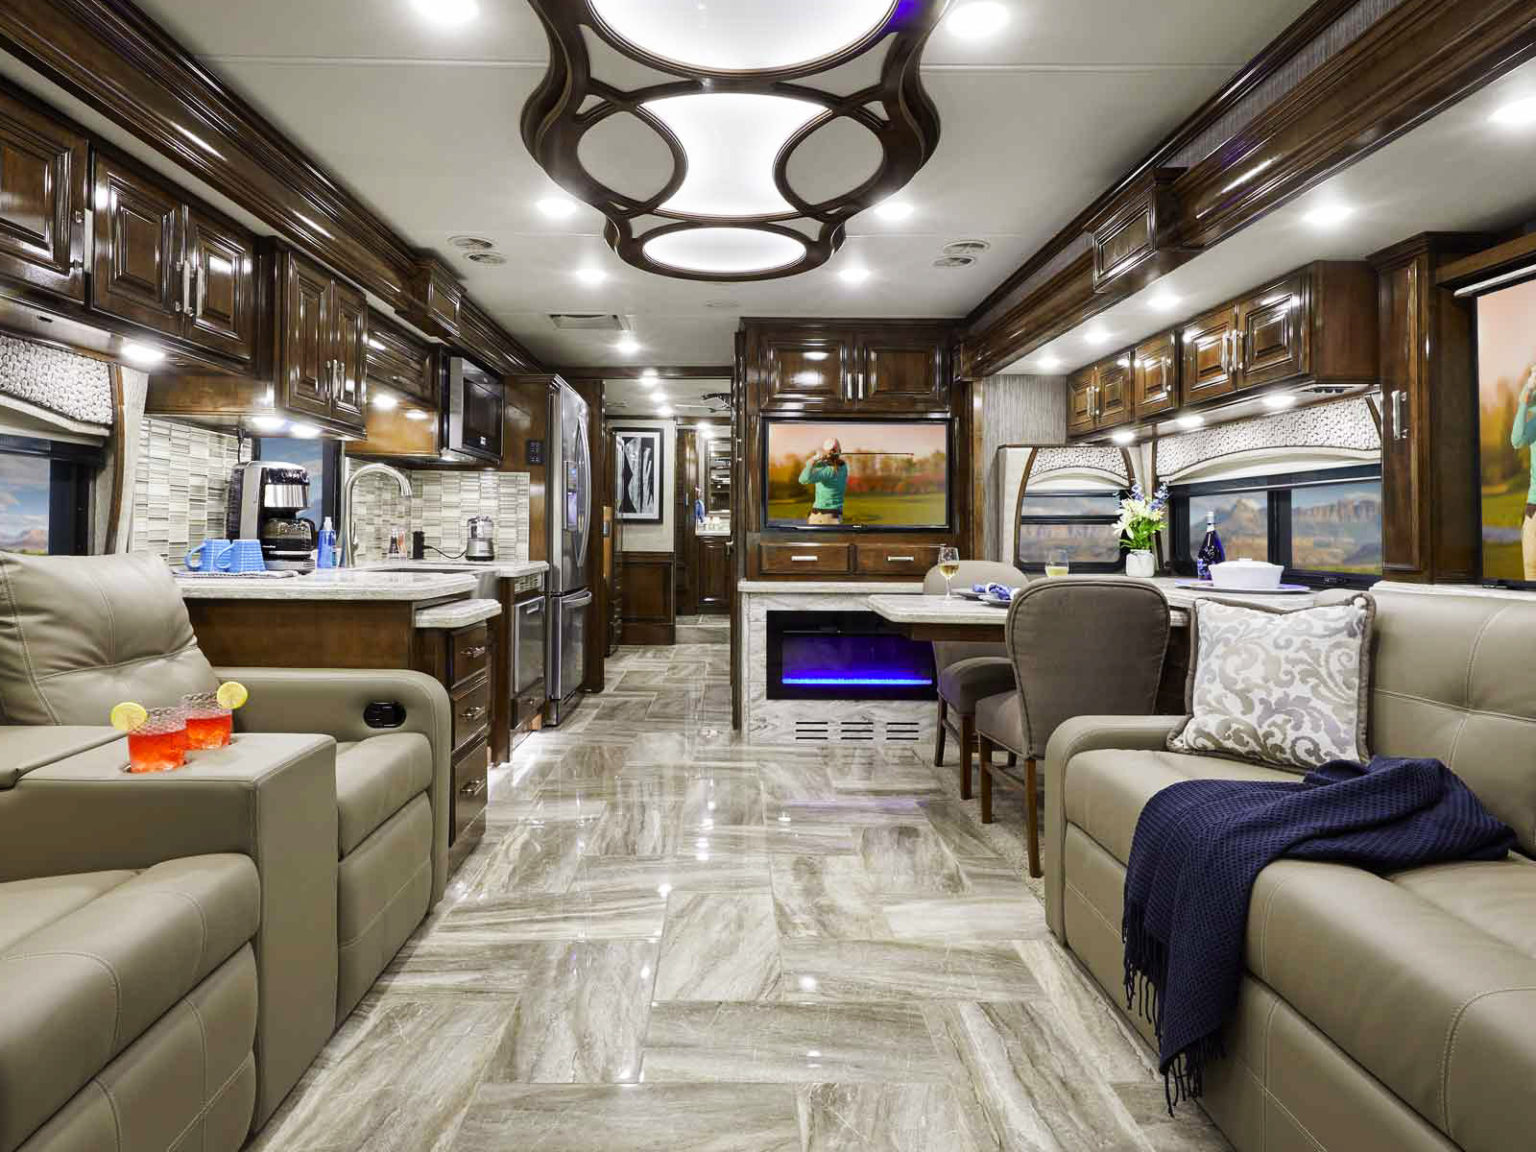 The luxury RVs on this start just over $200,000 and top out at over $2 million.